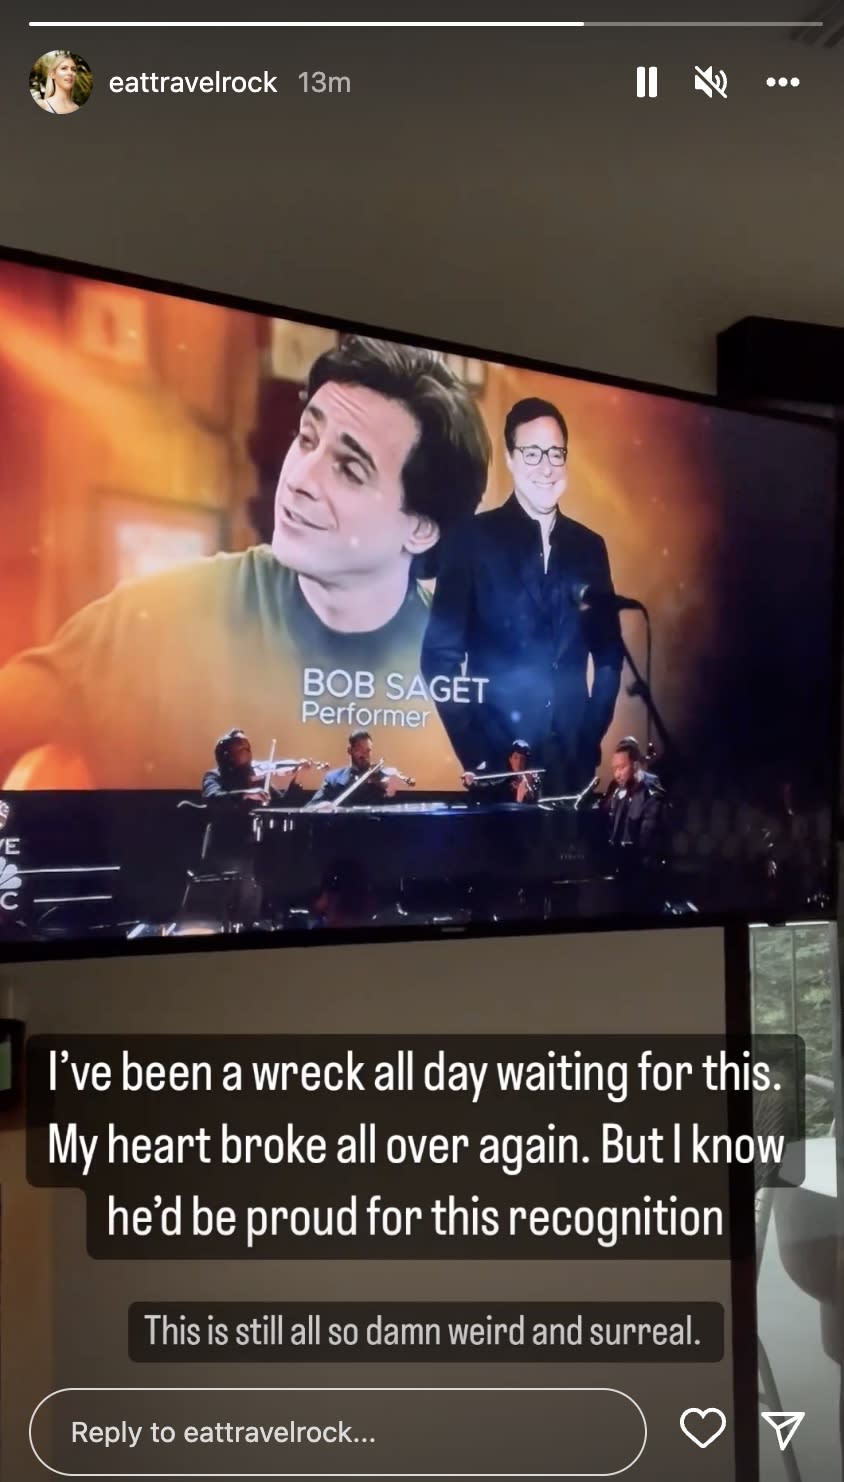 Kelly Rizzo reacts to Bob Saget's In Memoriam feature on social media